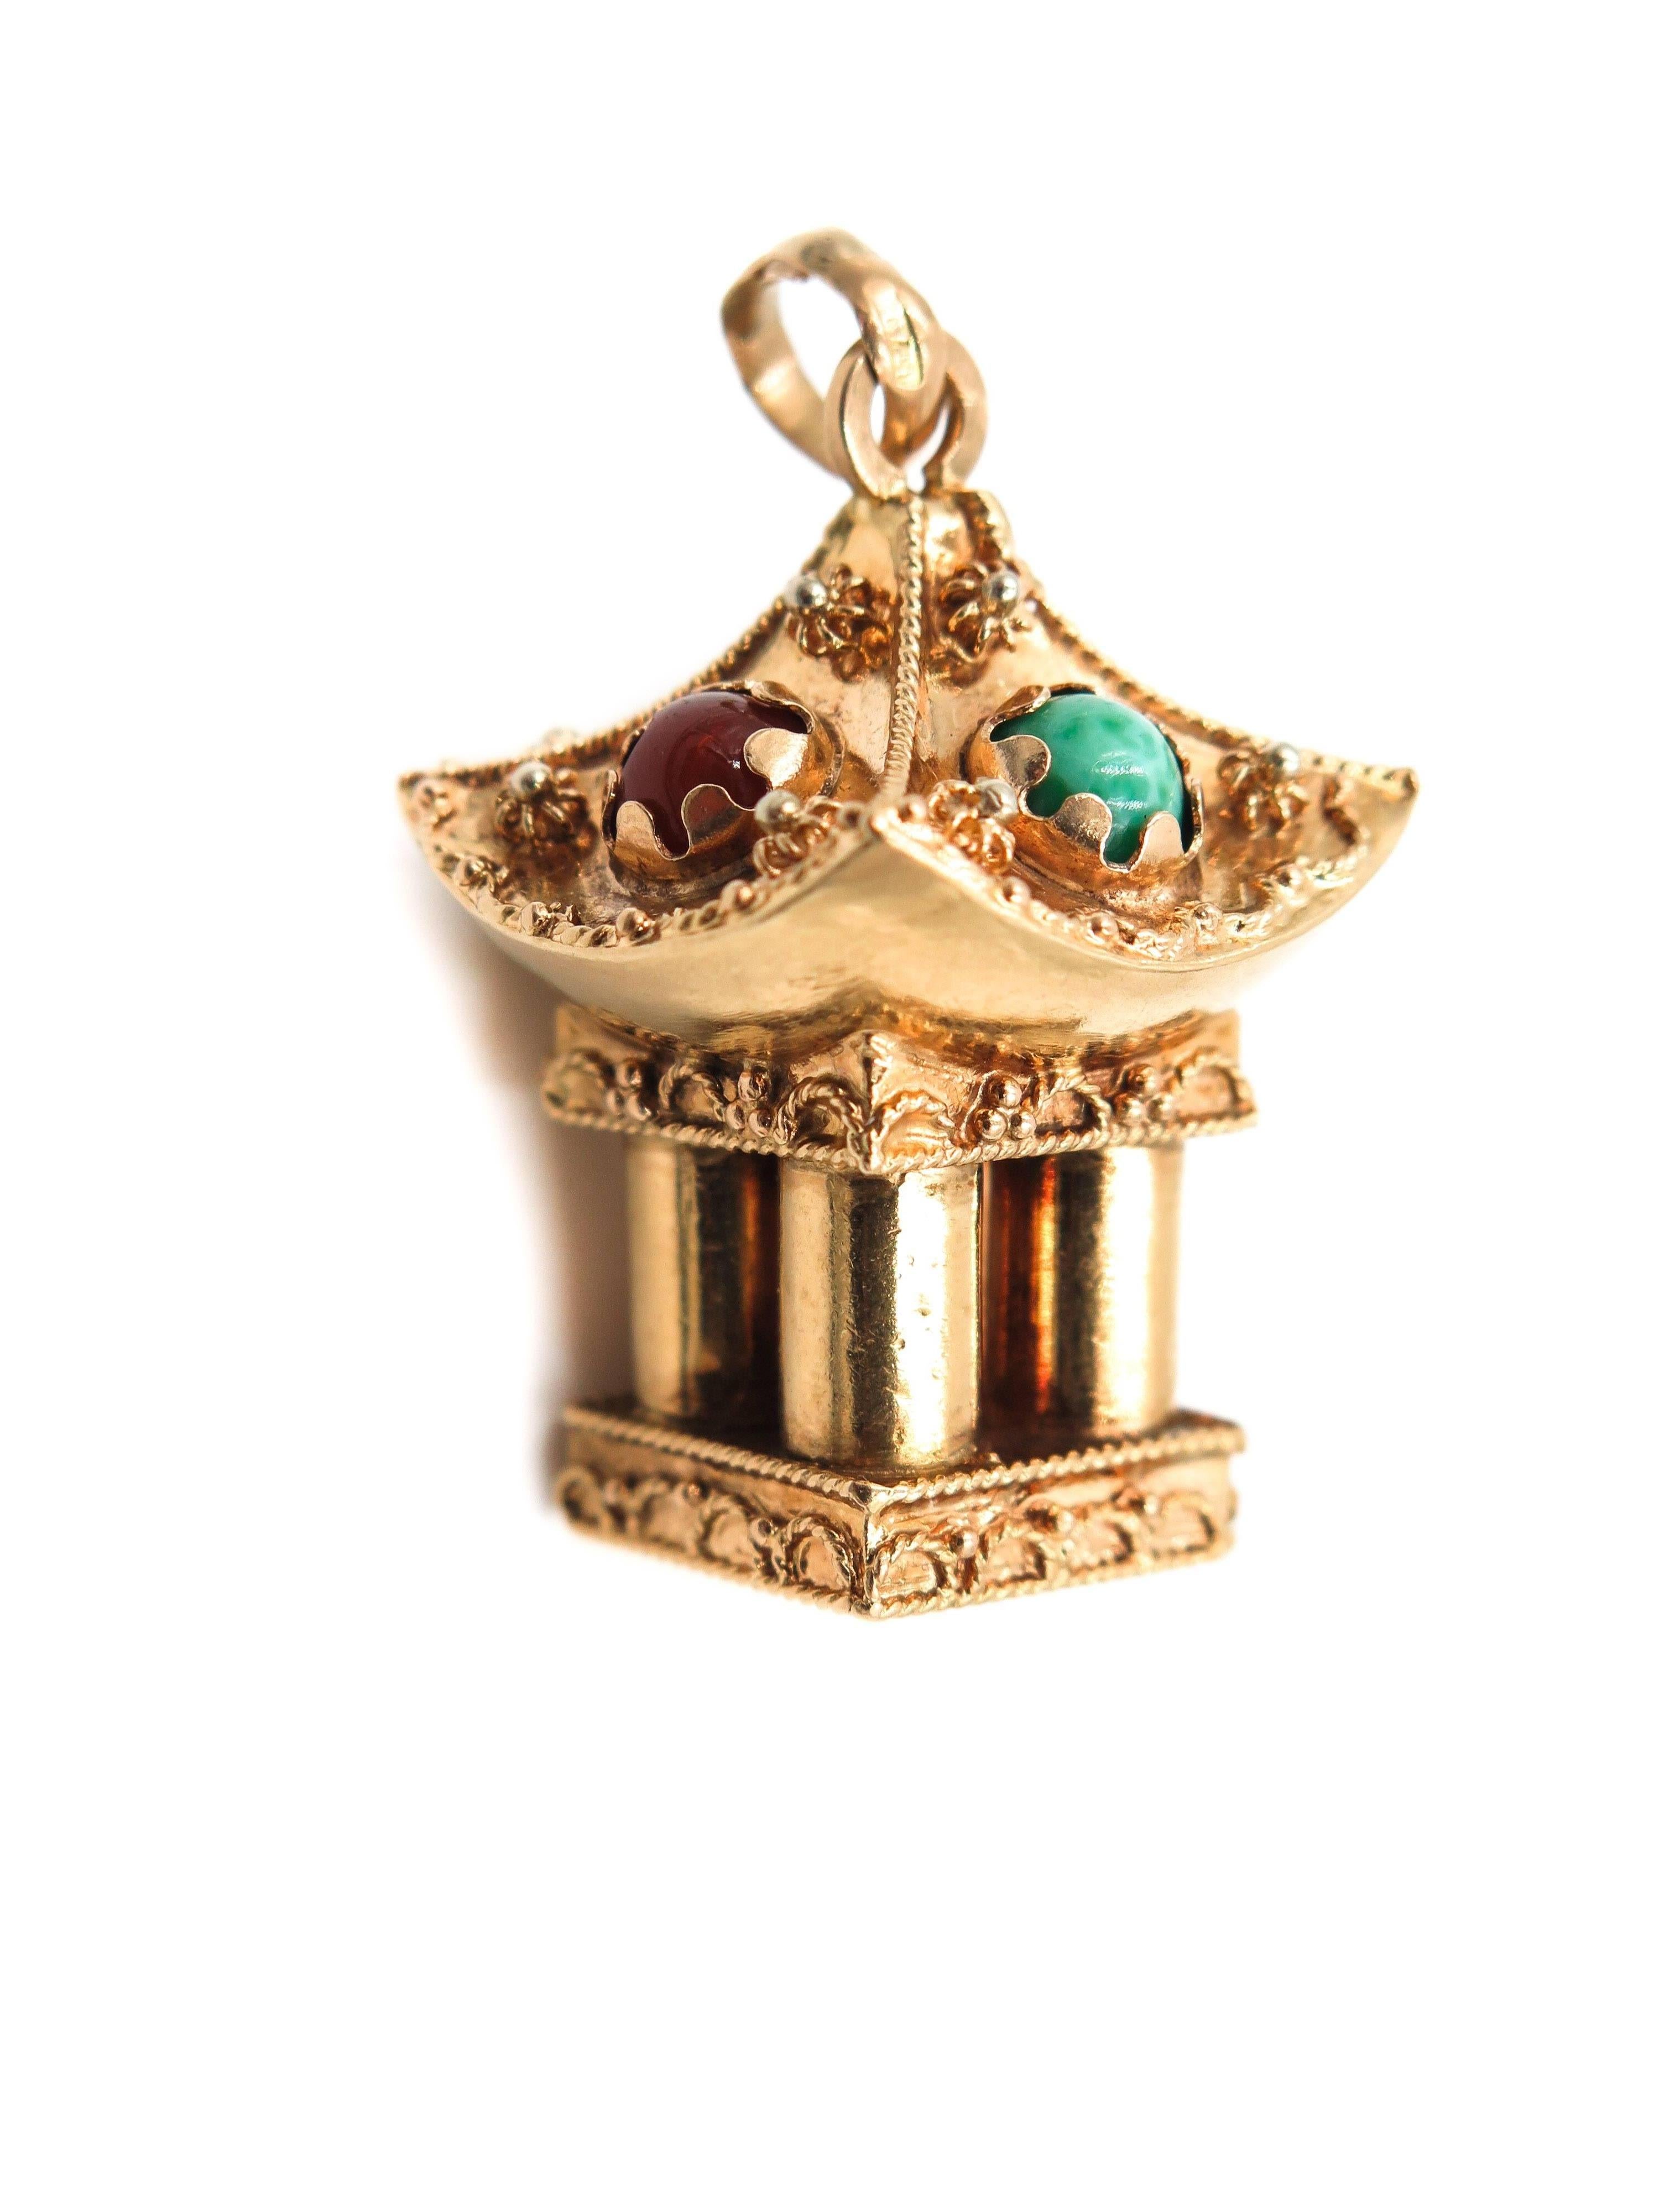 Etruscan Revival Vintage Etruscan Style Pagoda Charm in 18 Karat Yellow Gold